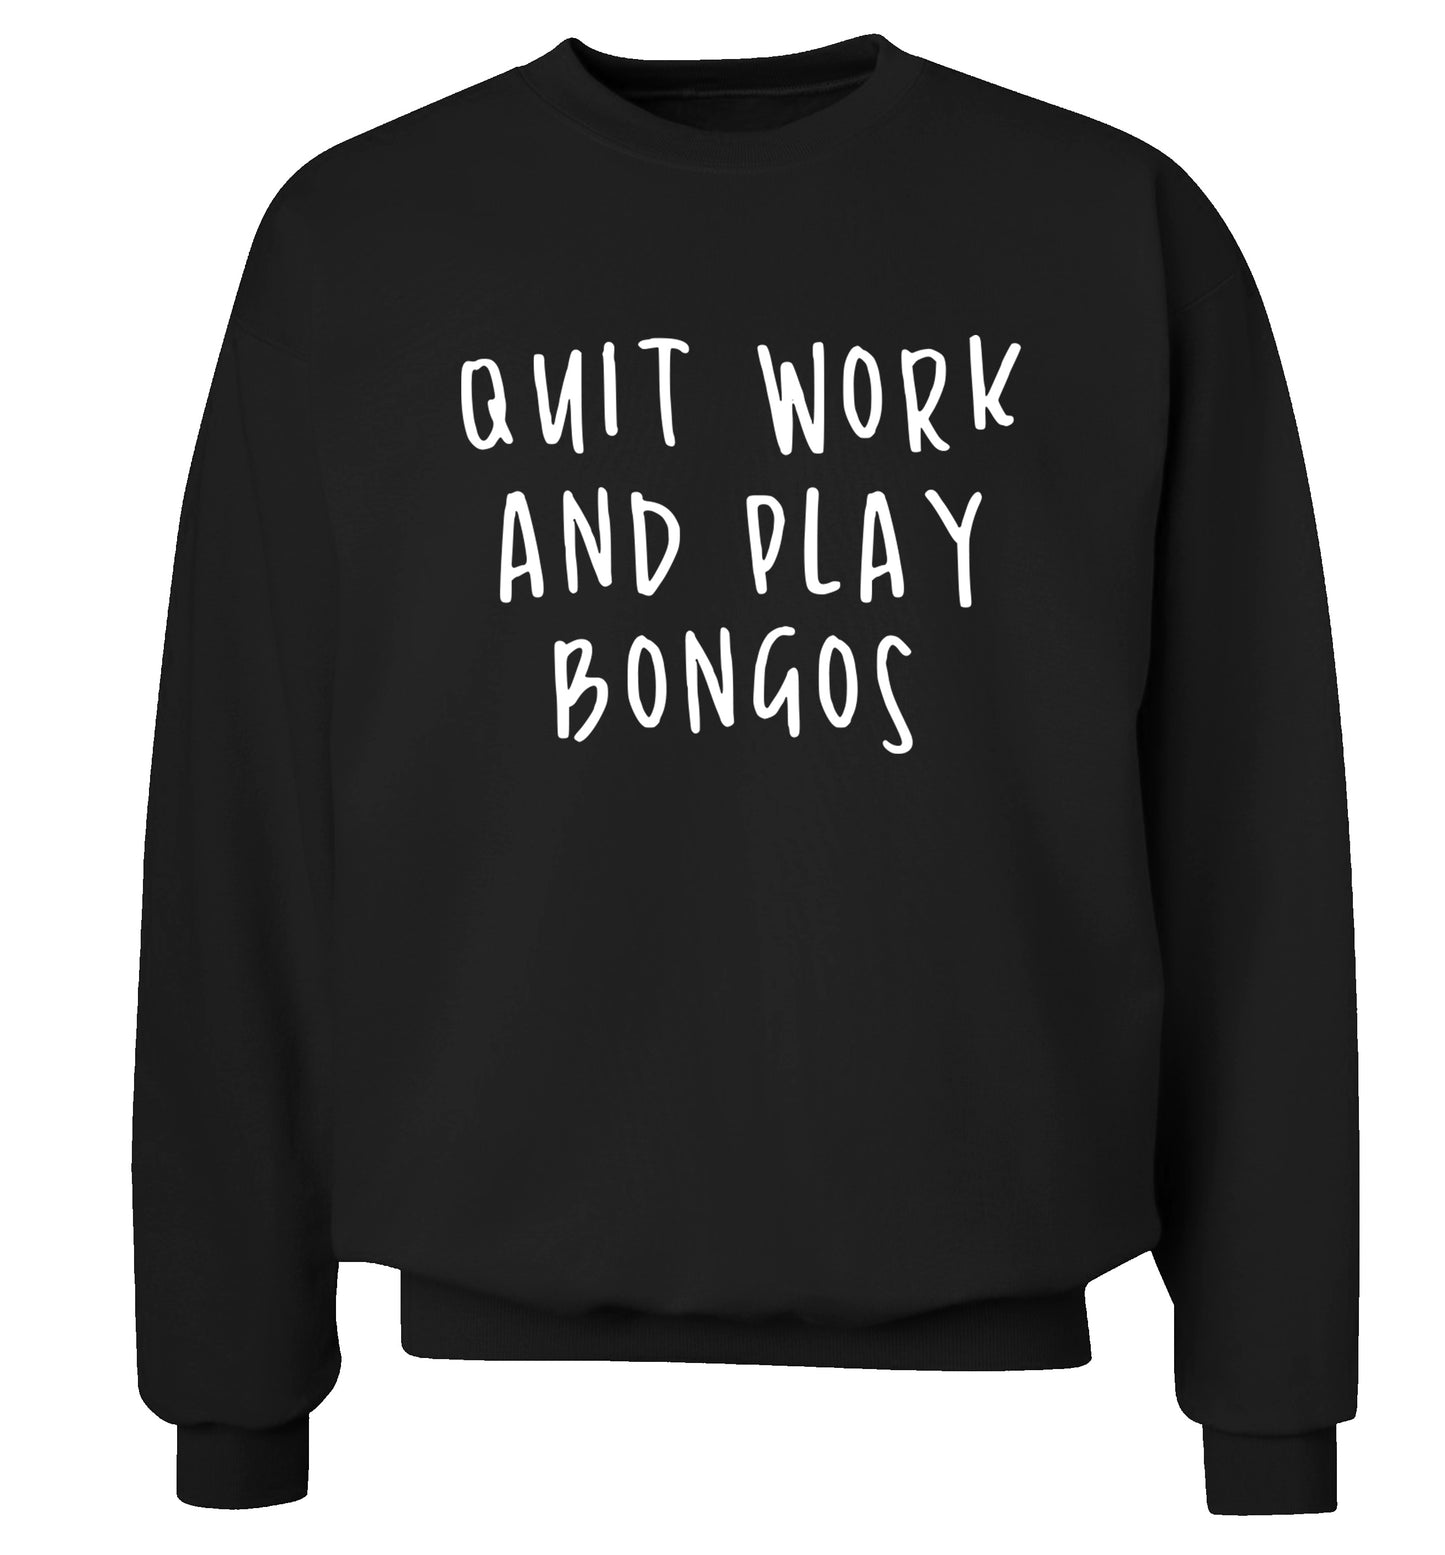 Quit work and play bongos Adult's unisex black Sweater 2XL